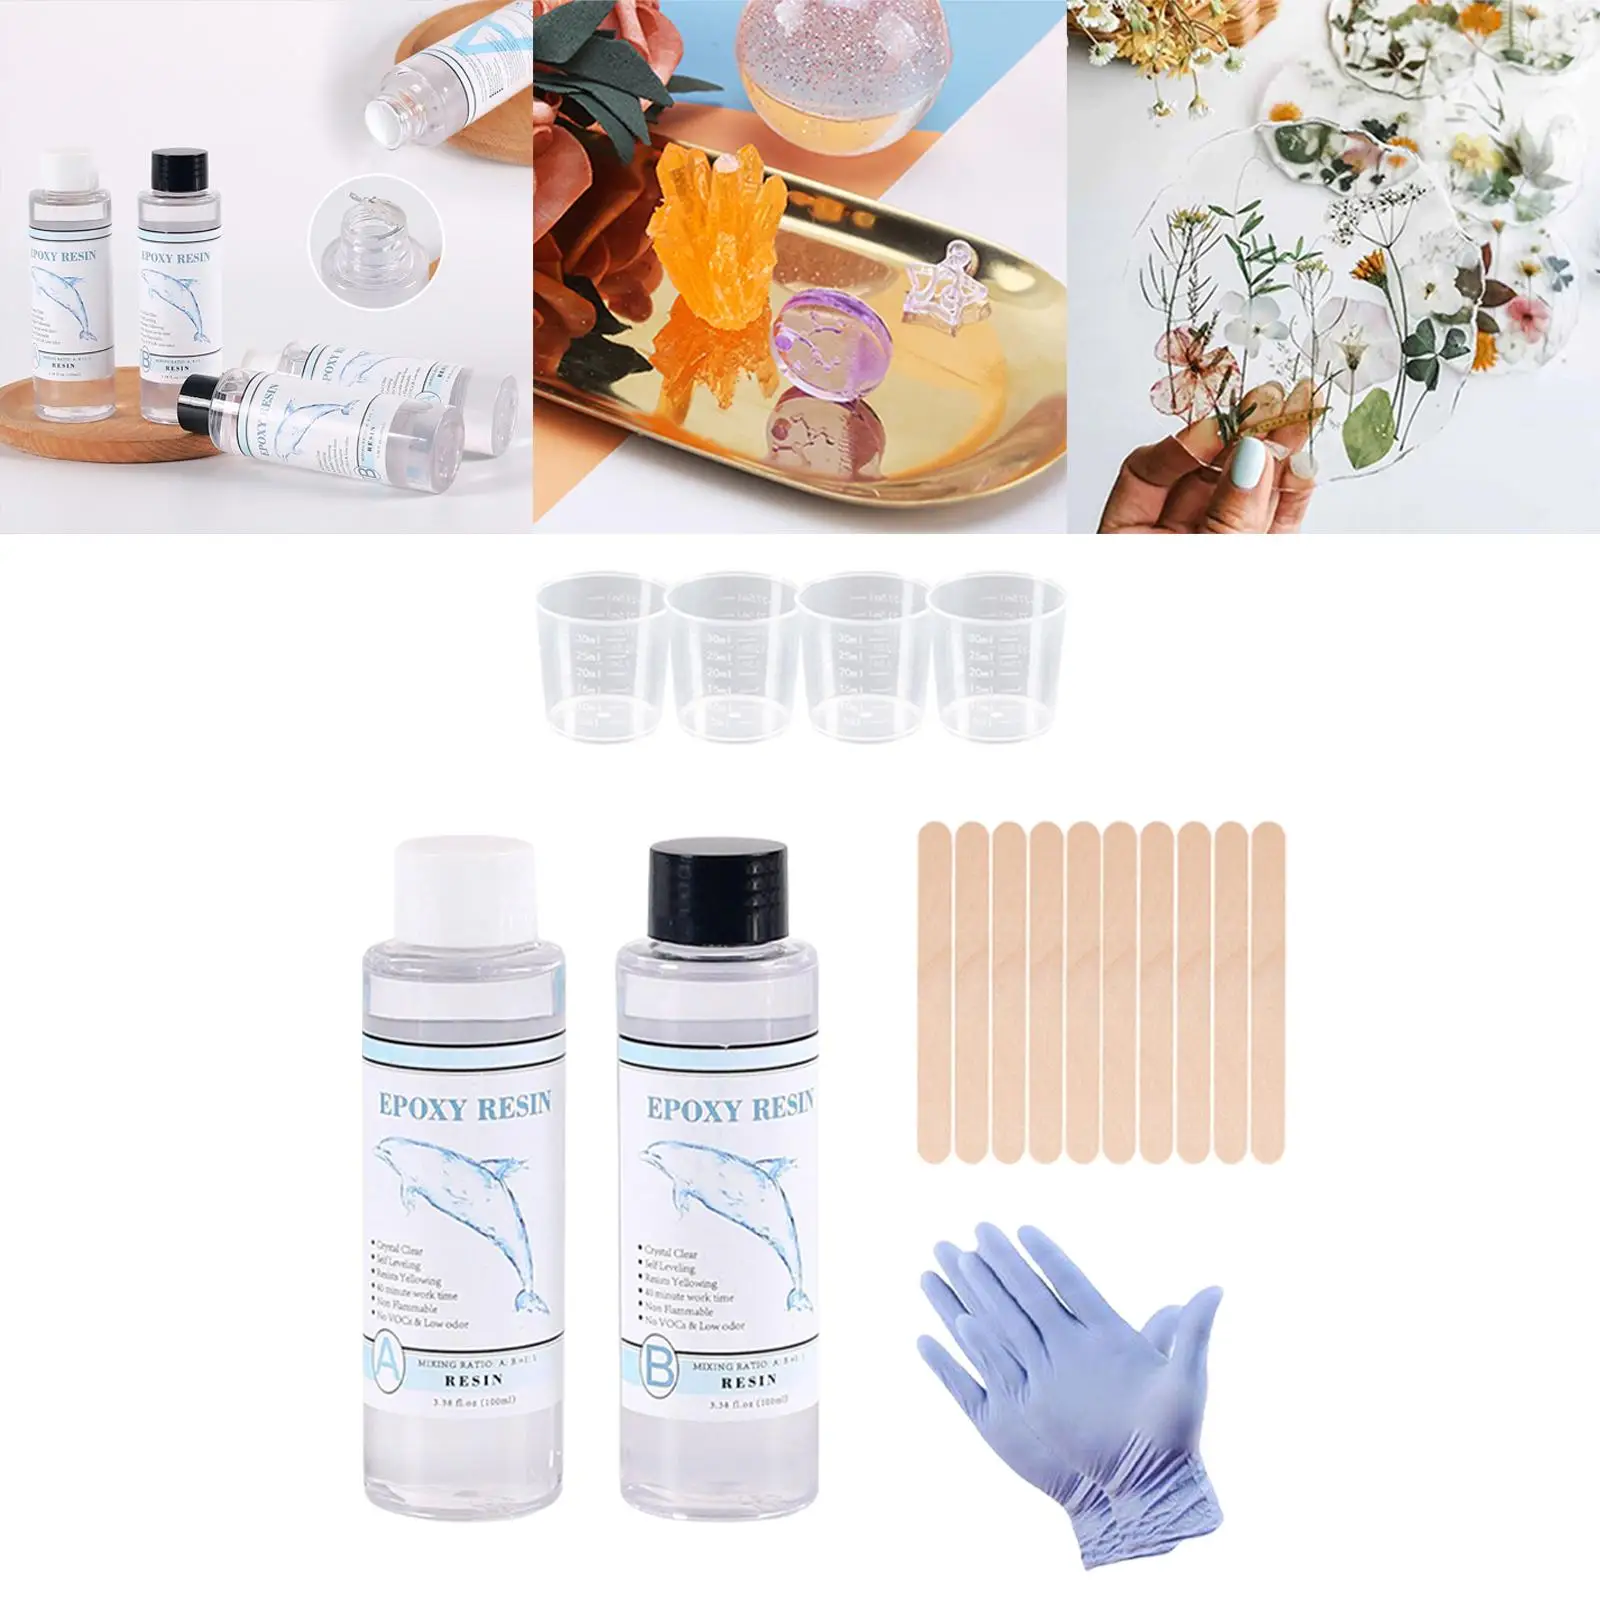 Epoxy Resin Clear Crystal Coating Kit with Gloves, Sticks for Jewelry Making